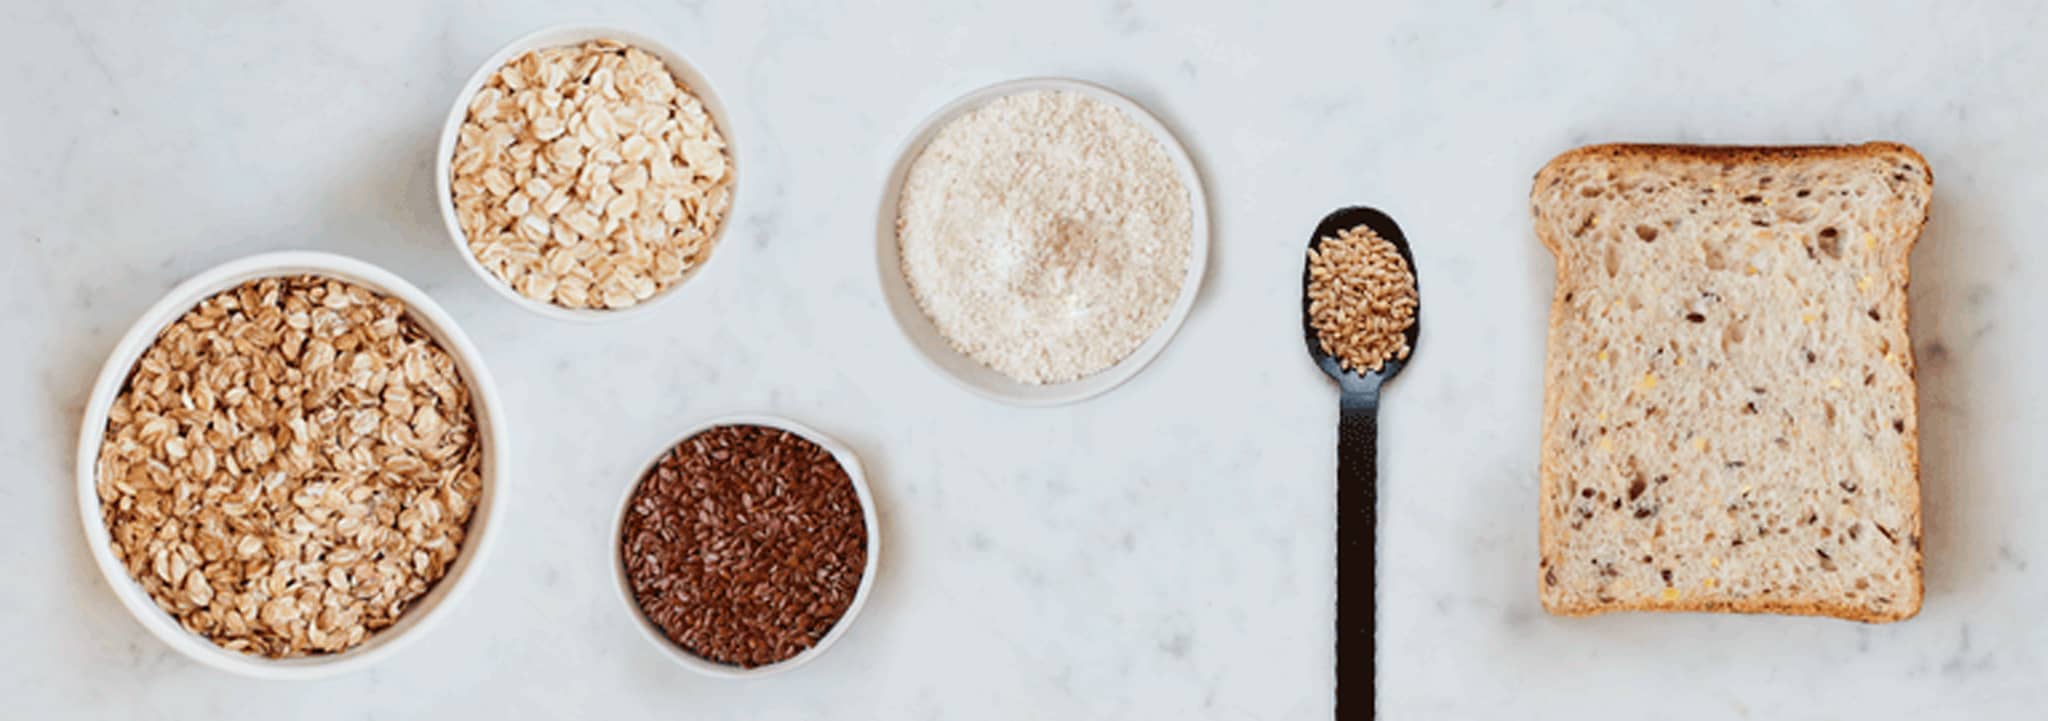 What’s to gain from whole grains?